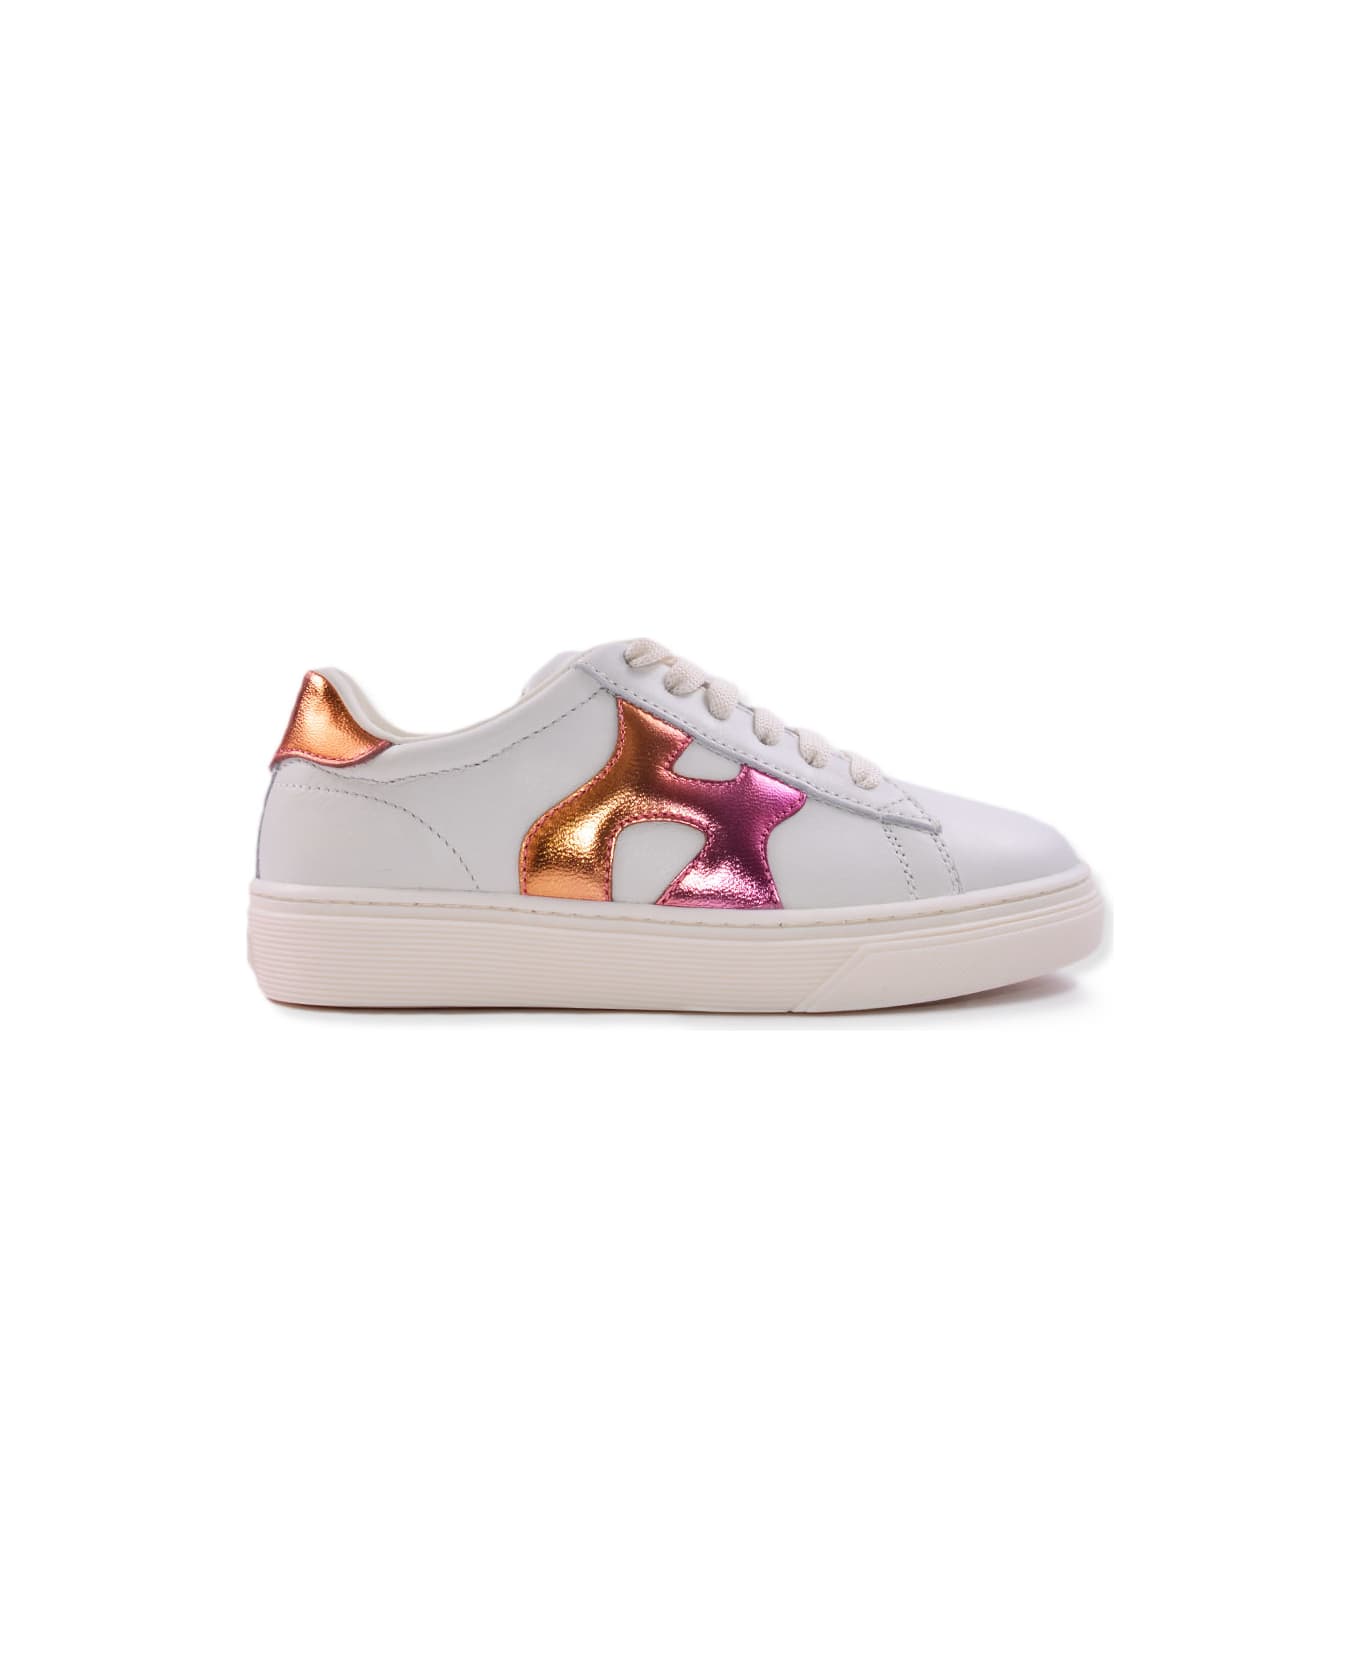 Hogan J340 Sneakers In Leather - White